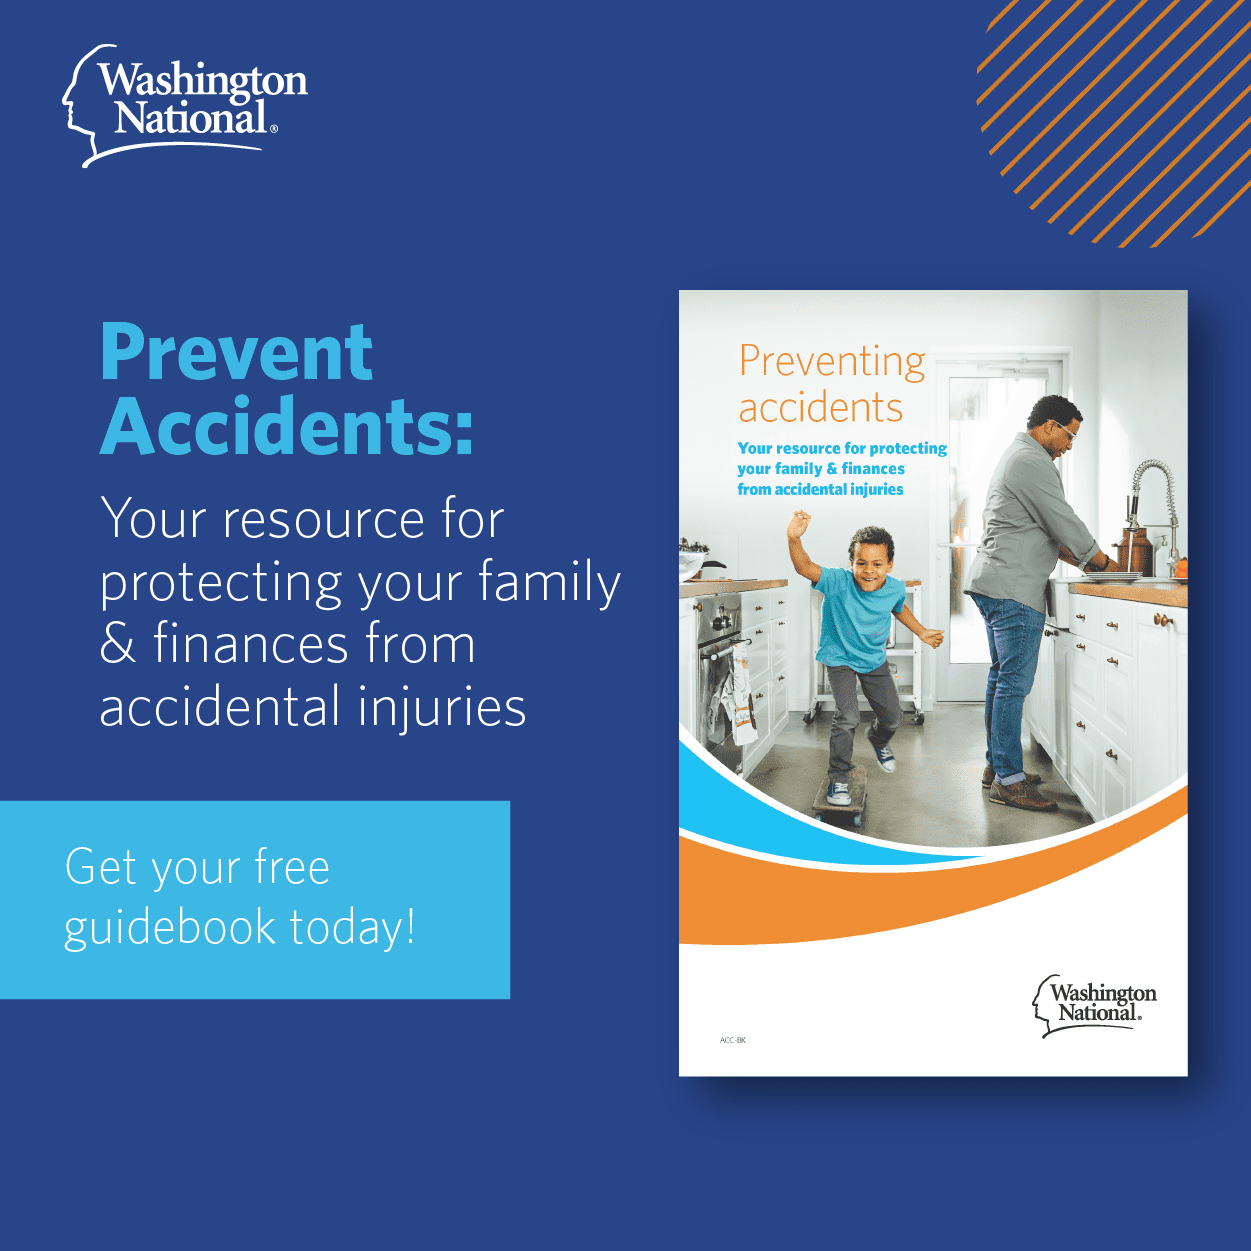 A downloadable guide to preventing accidents.